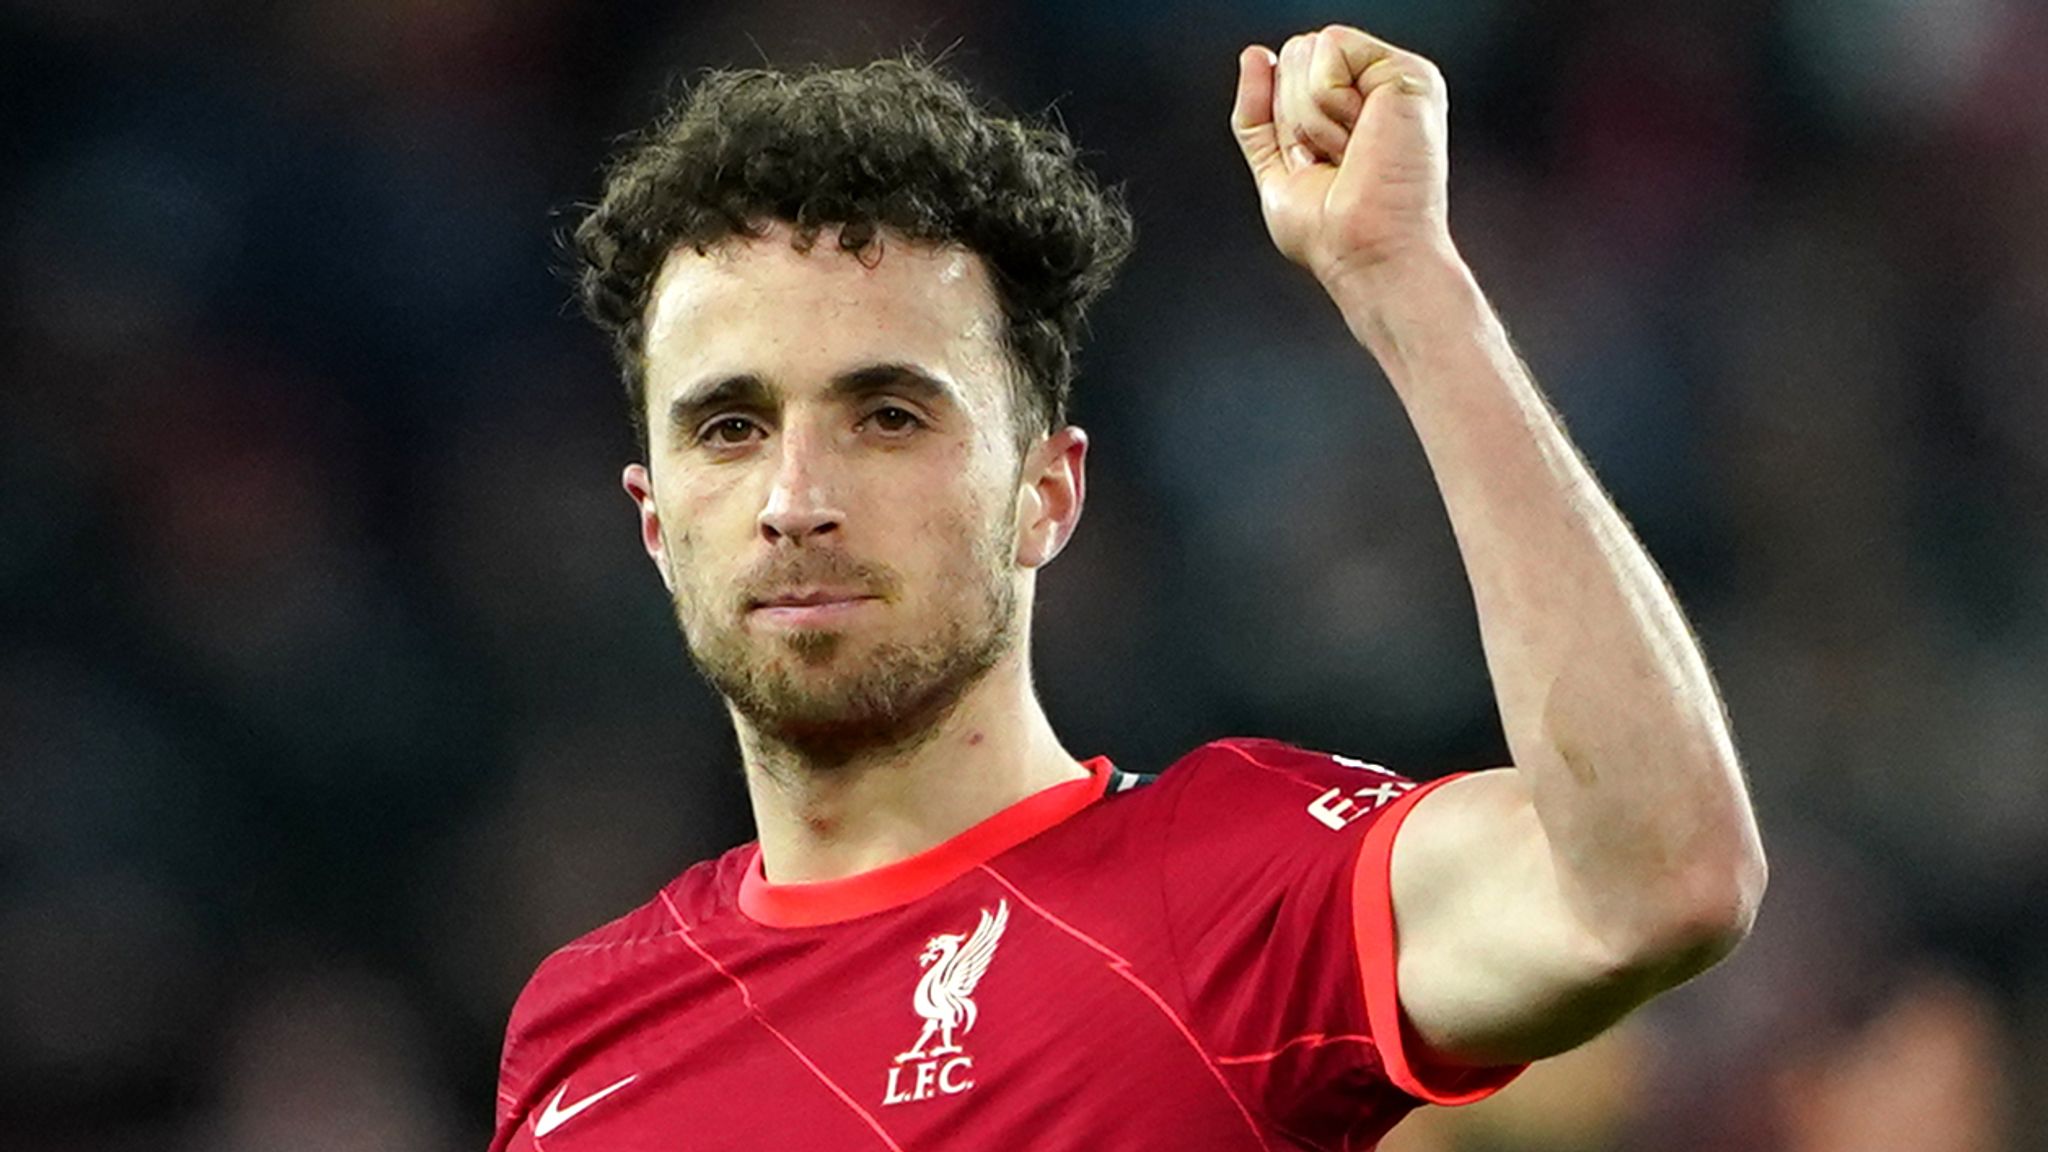 Liverpool star Diogo Jota could potentially miss the EFL Cup final against Chelsea due to injury.